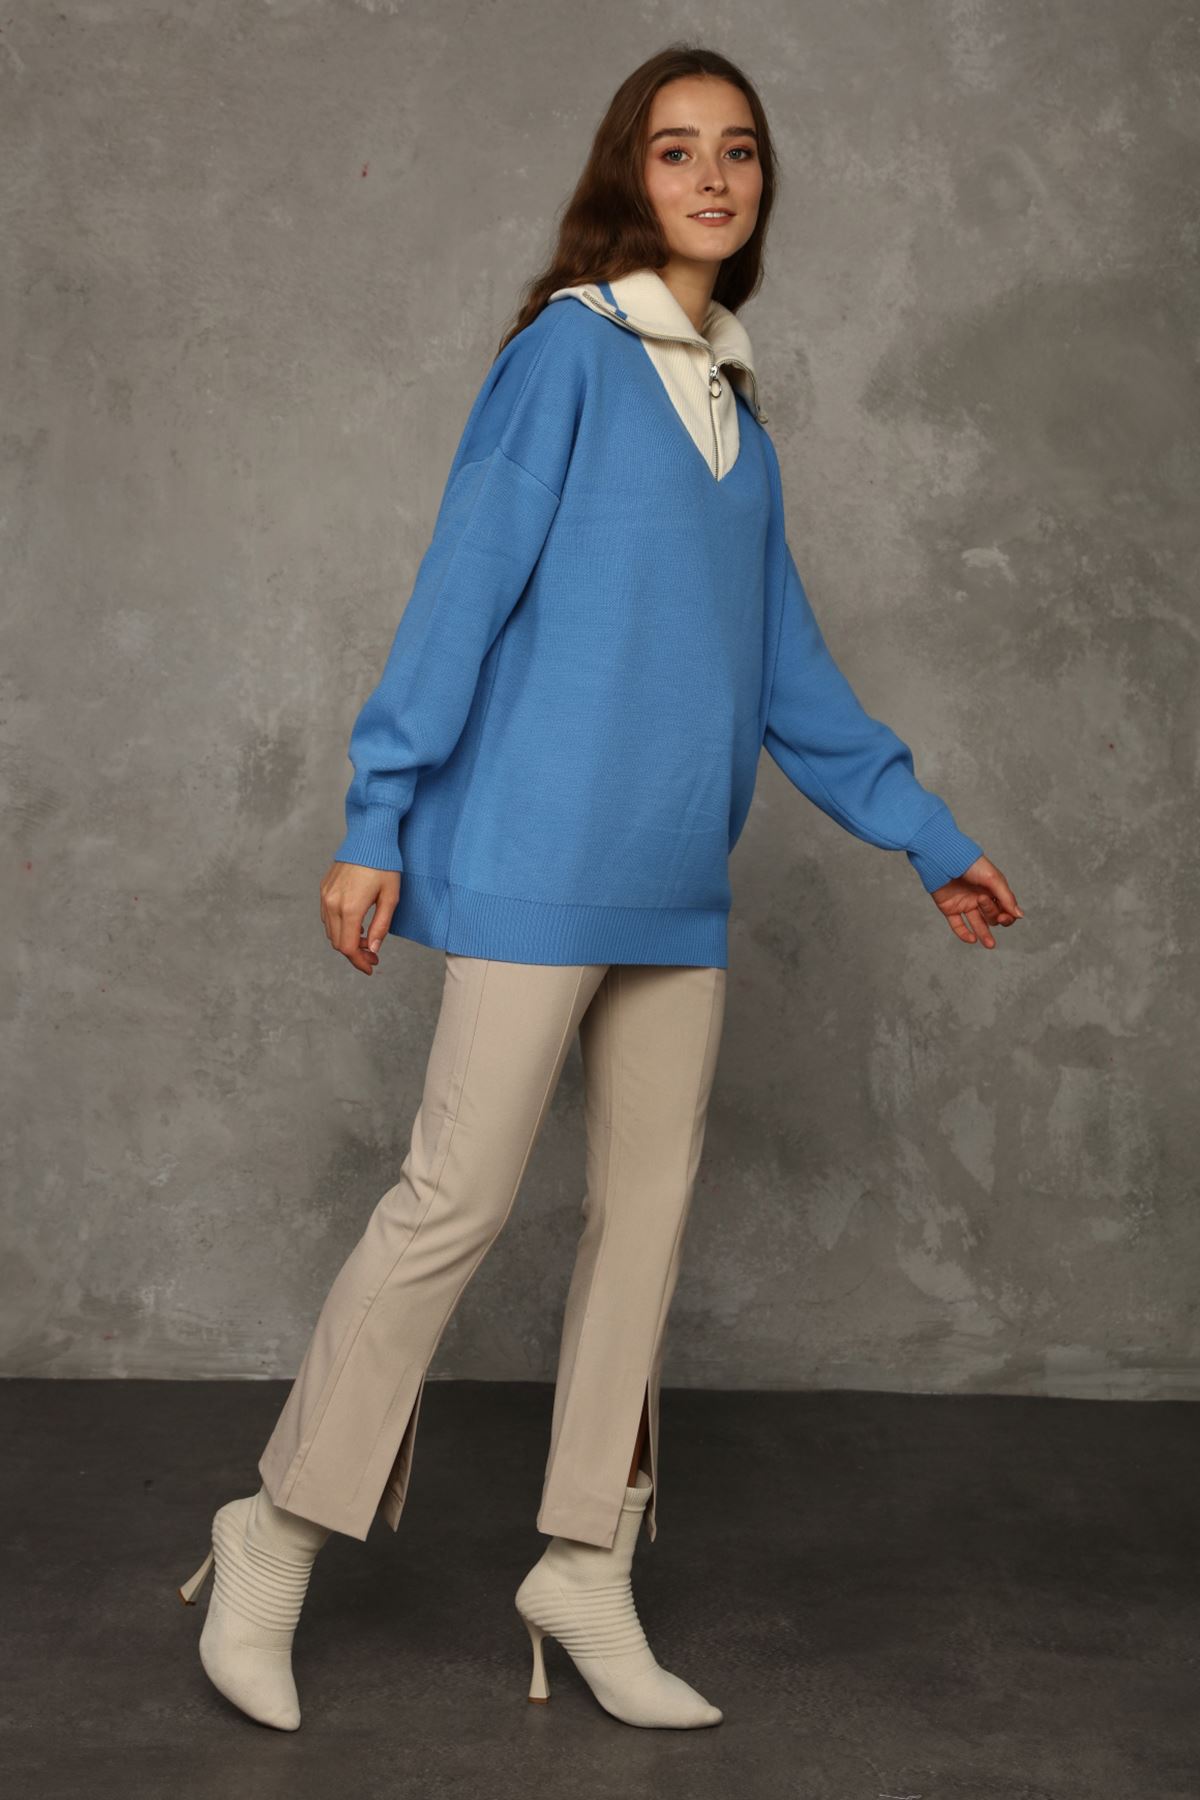 Women's Pullover with Zipper Around the Neck